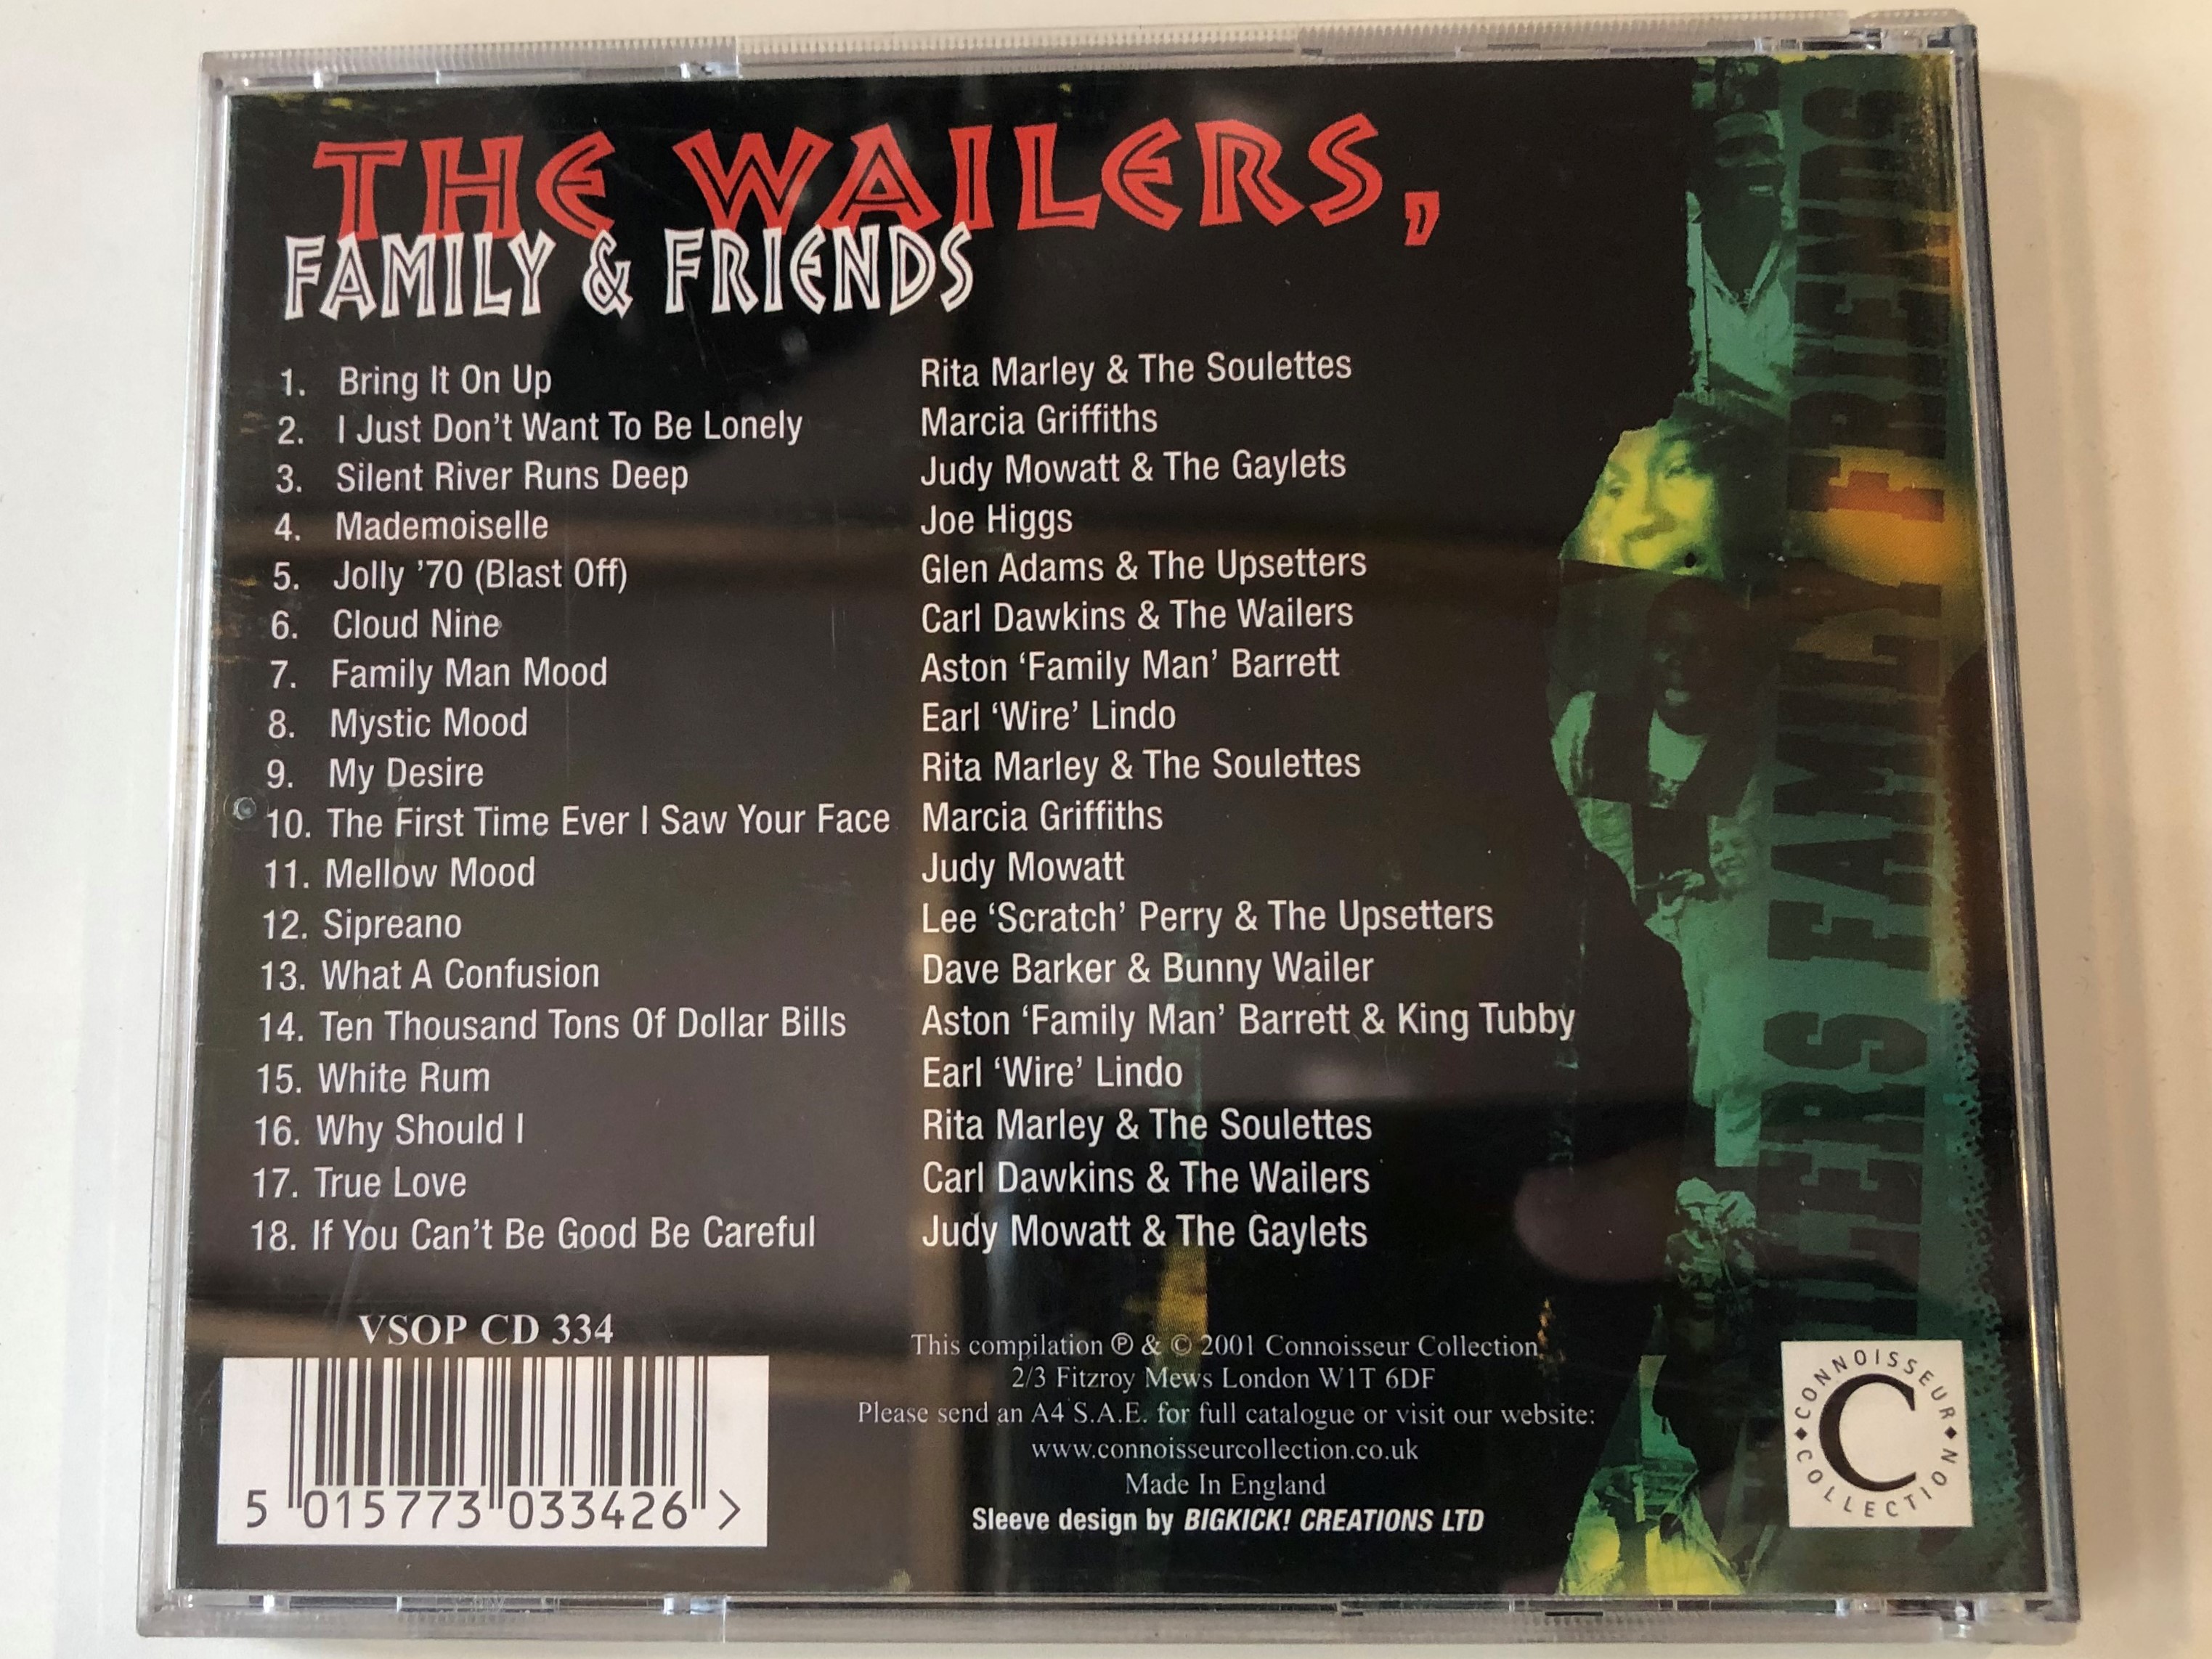 the-wailers-family-friends-18-songs-by-the-mothers-fathers-of-reggac-featuring-bring-it-on-up-rita-marley-the-soulettes-i-just-dont-want-to-be-lonely-marcia-griffiths-family-man-3-.jpg